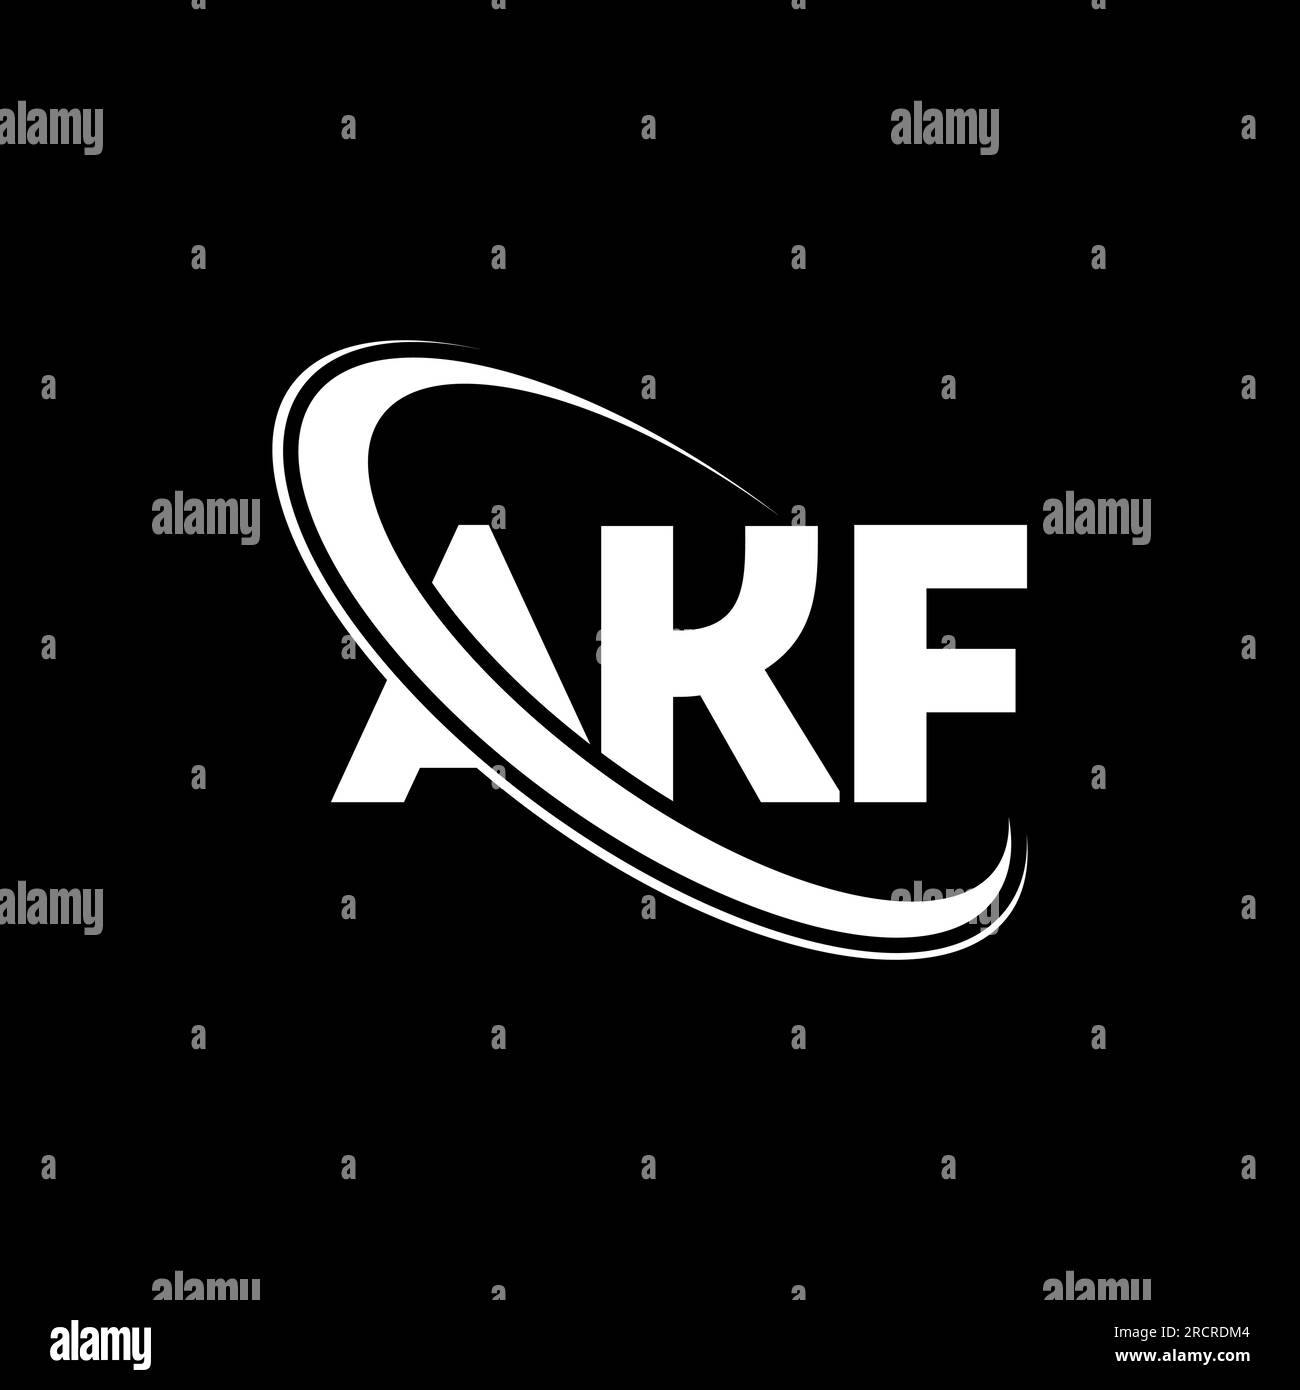 AKF logo. AKF letter. AKF letter logo design. Initials AKF logo linked with circle and uppercase monogram logo. AKF typography for technology, busines Stock Vector